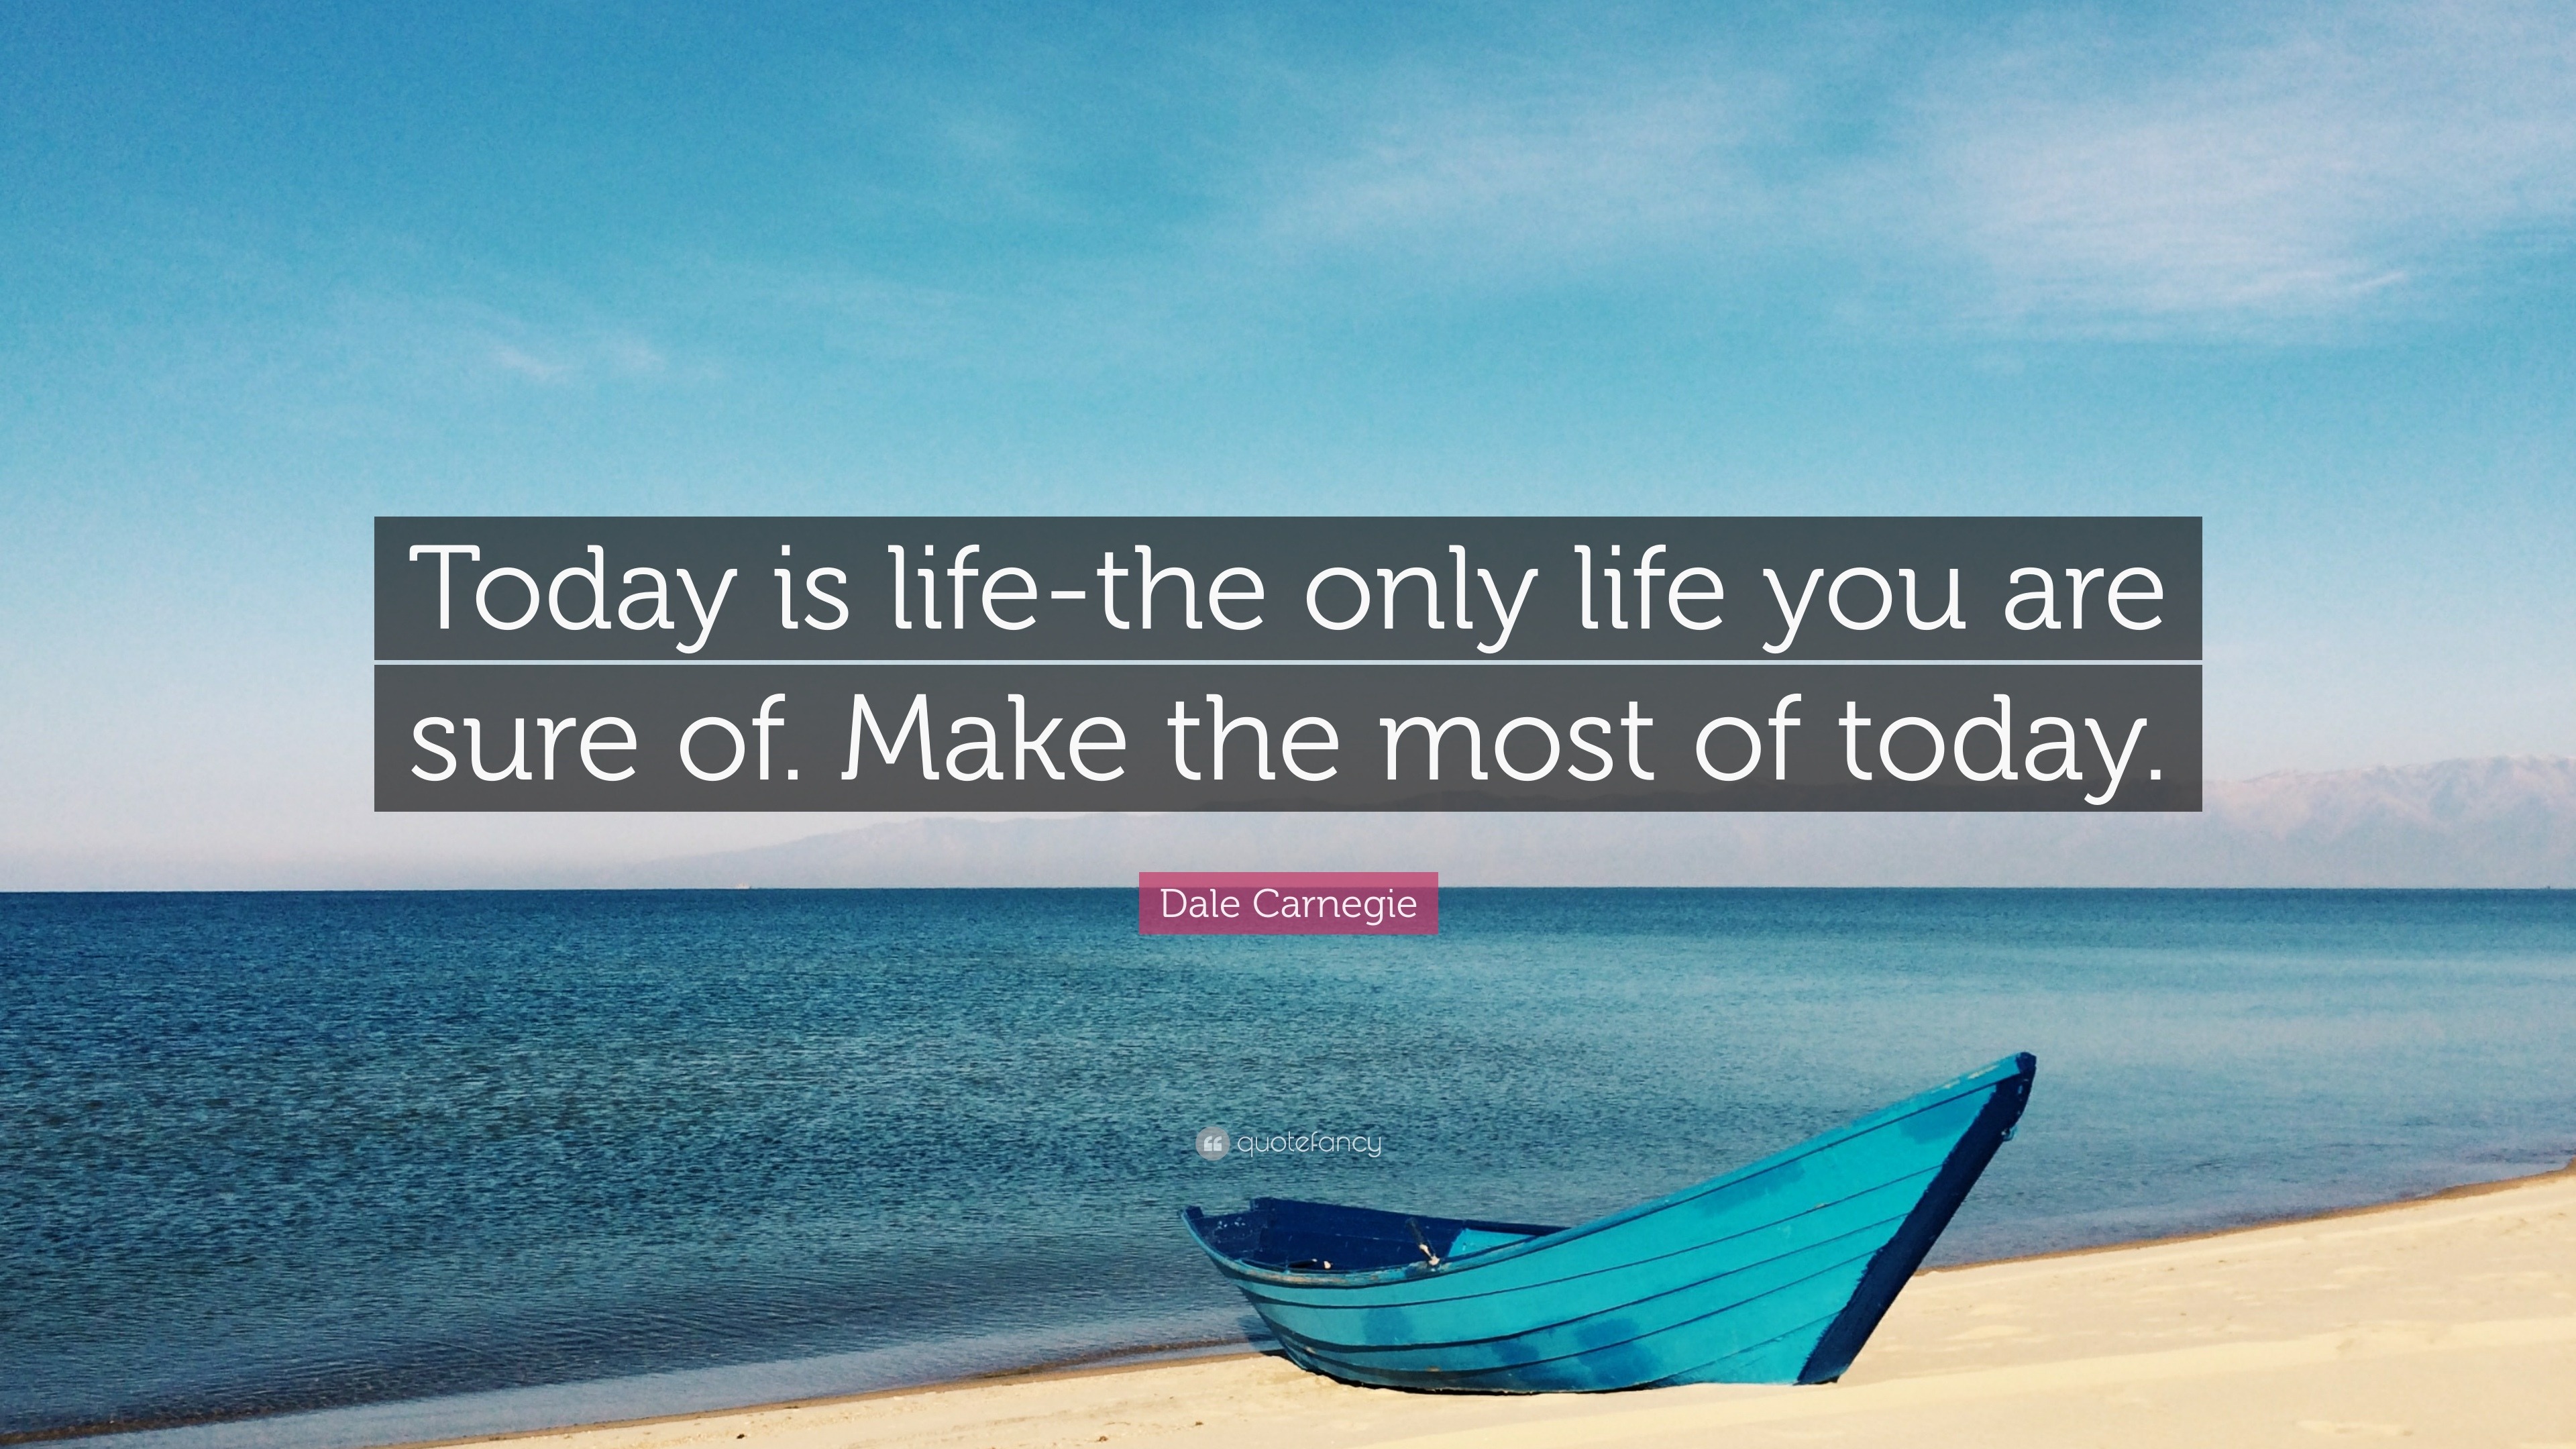 Dale Carnegie Quote “Today is life the only life you are sure of